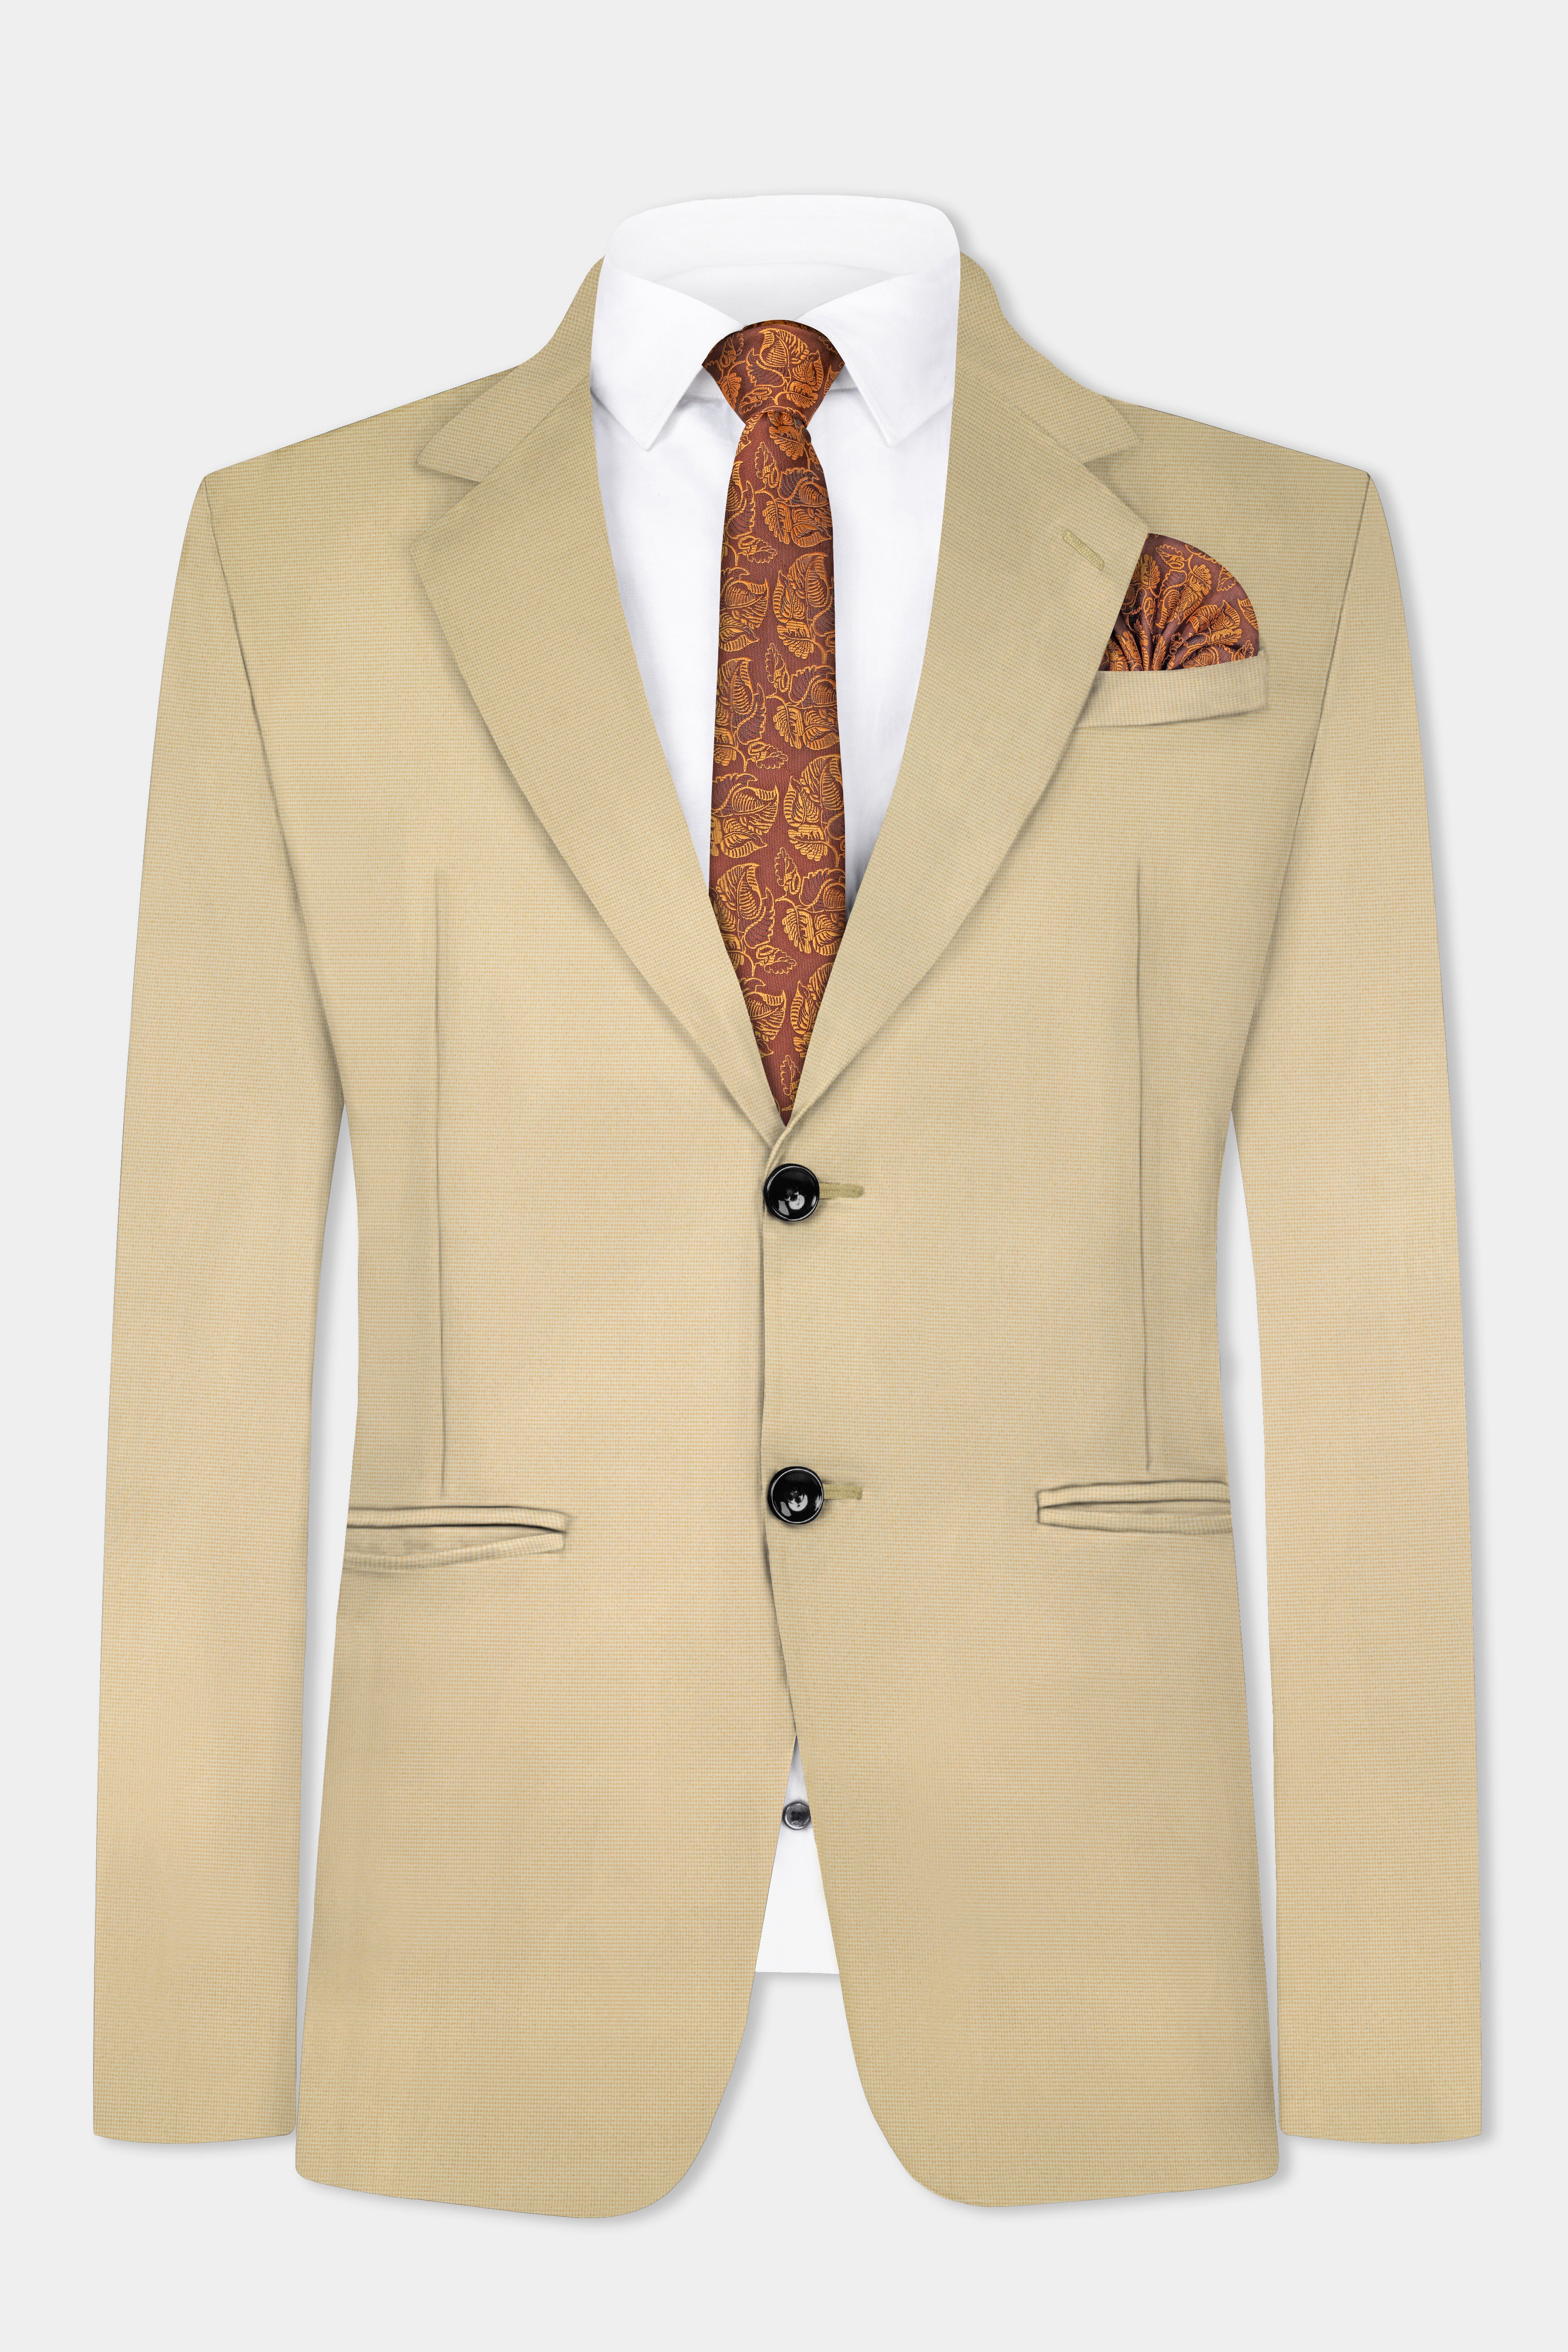 Hampton Cream Houndstooth Wool Rich Single Breasted Suit